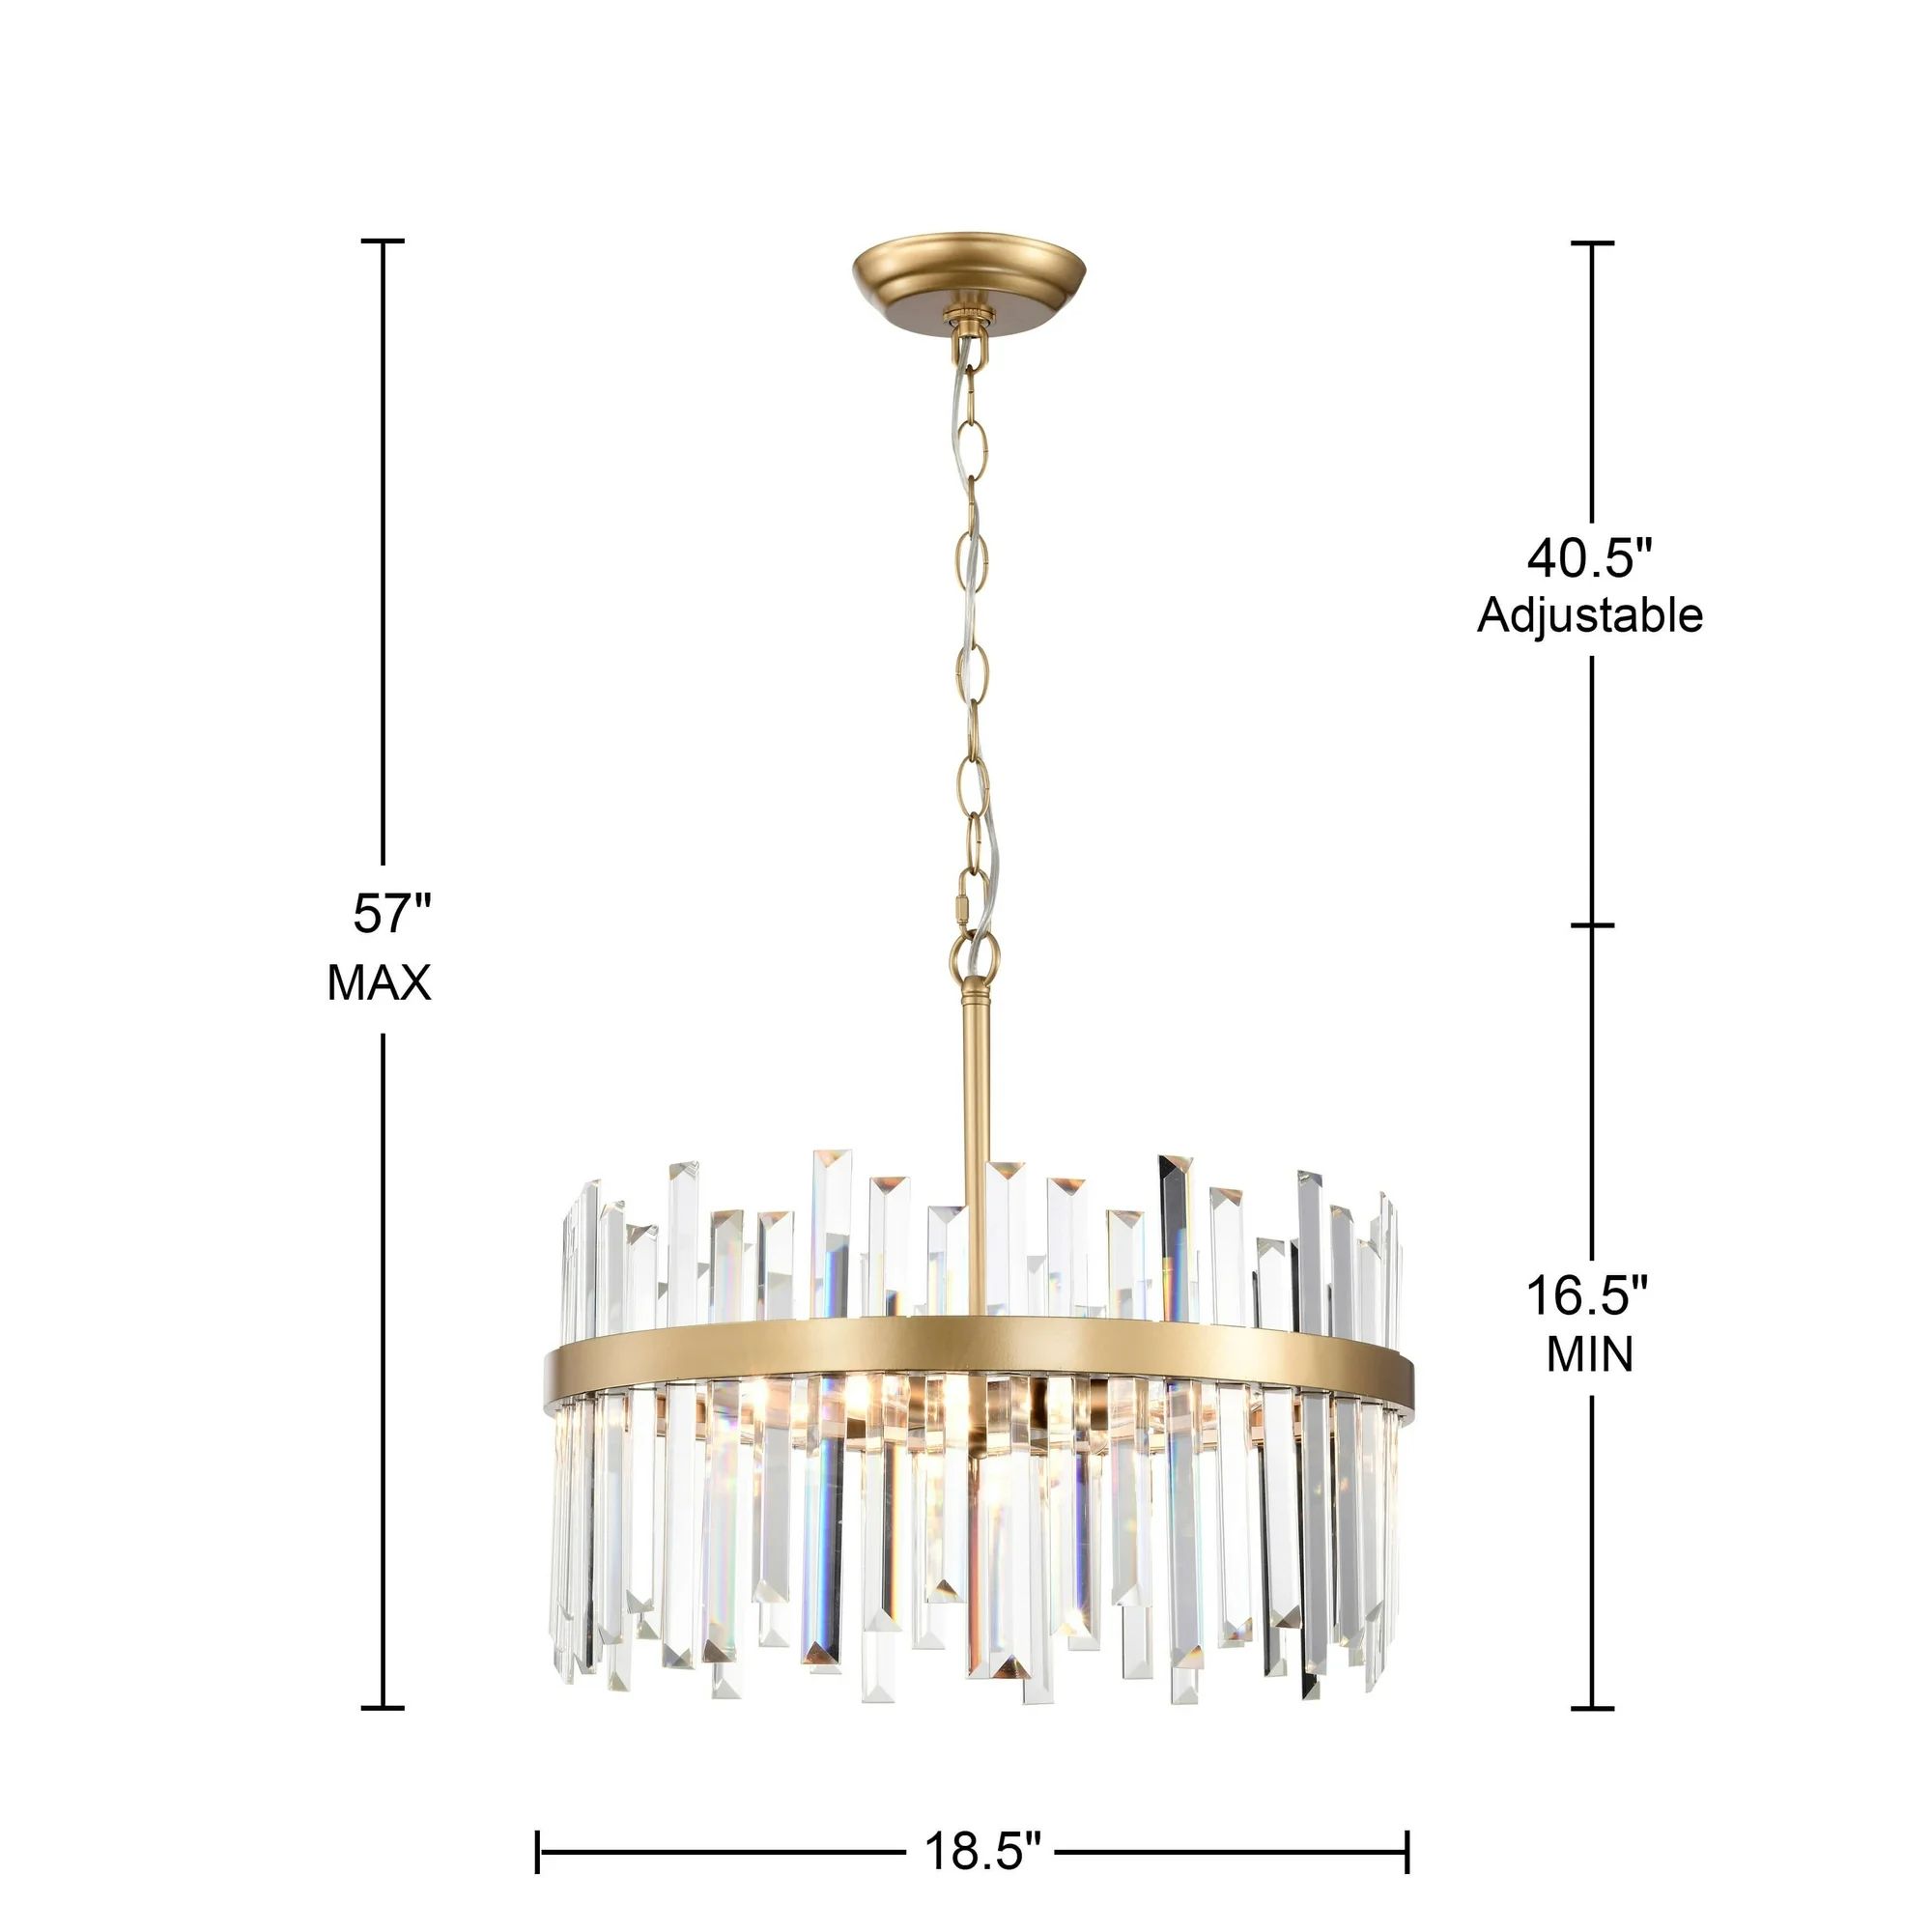 The Lighting Store Casandra Glossy Bronze 5-light Drum Crystal Glass Chandelier - 18.5 inches in ... | Walmart (US)